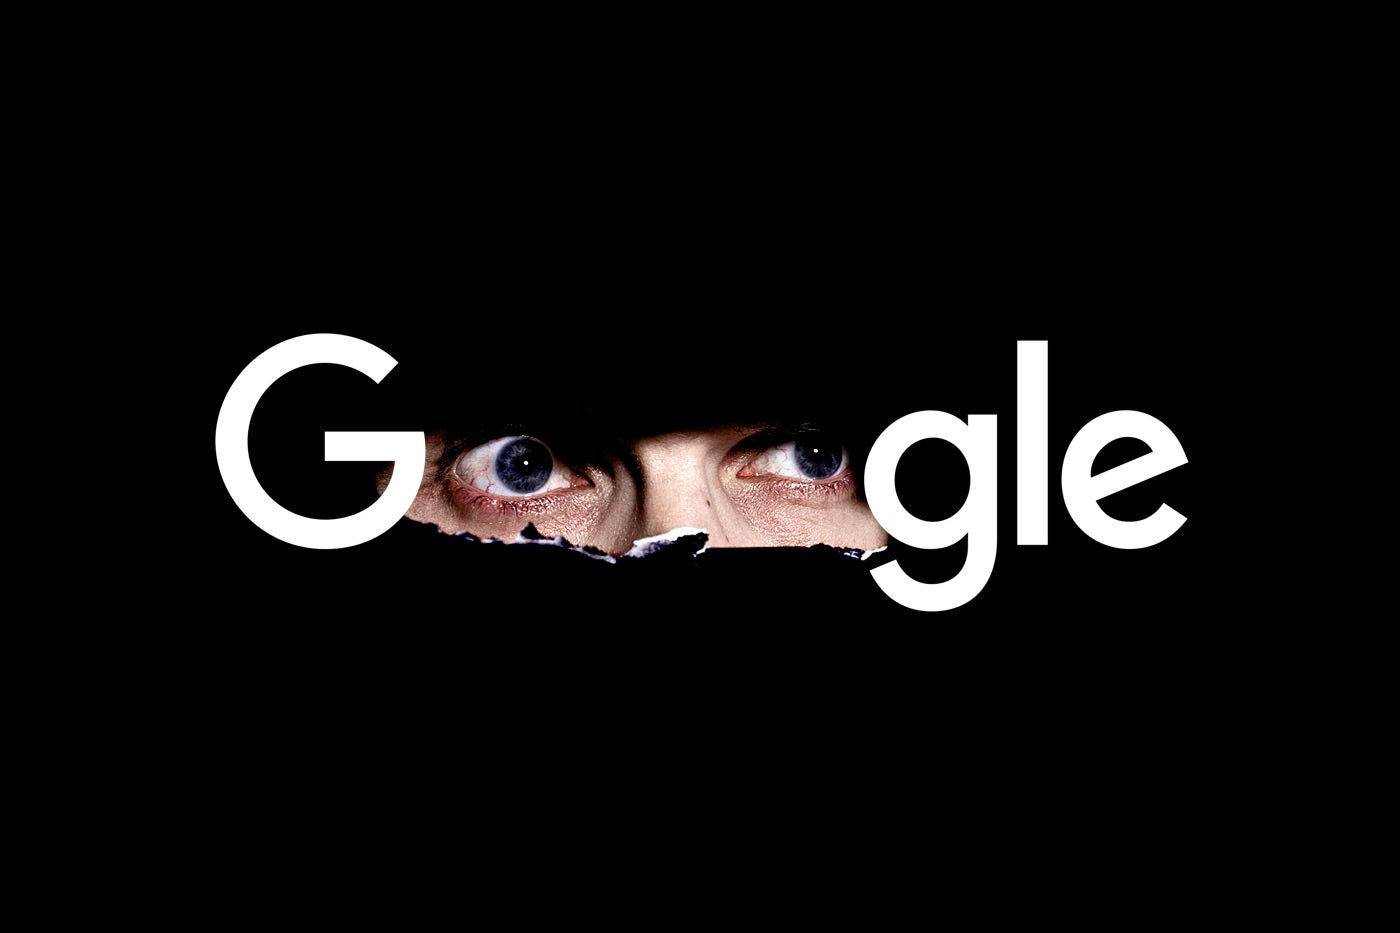 Google logo with the O's looking like spying eyes.